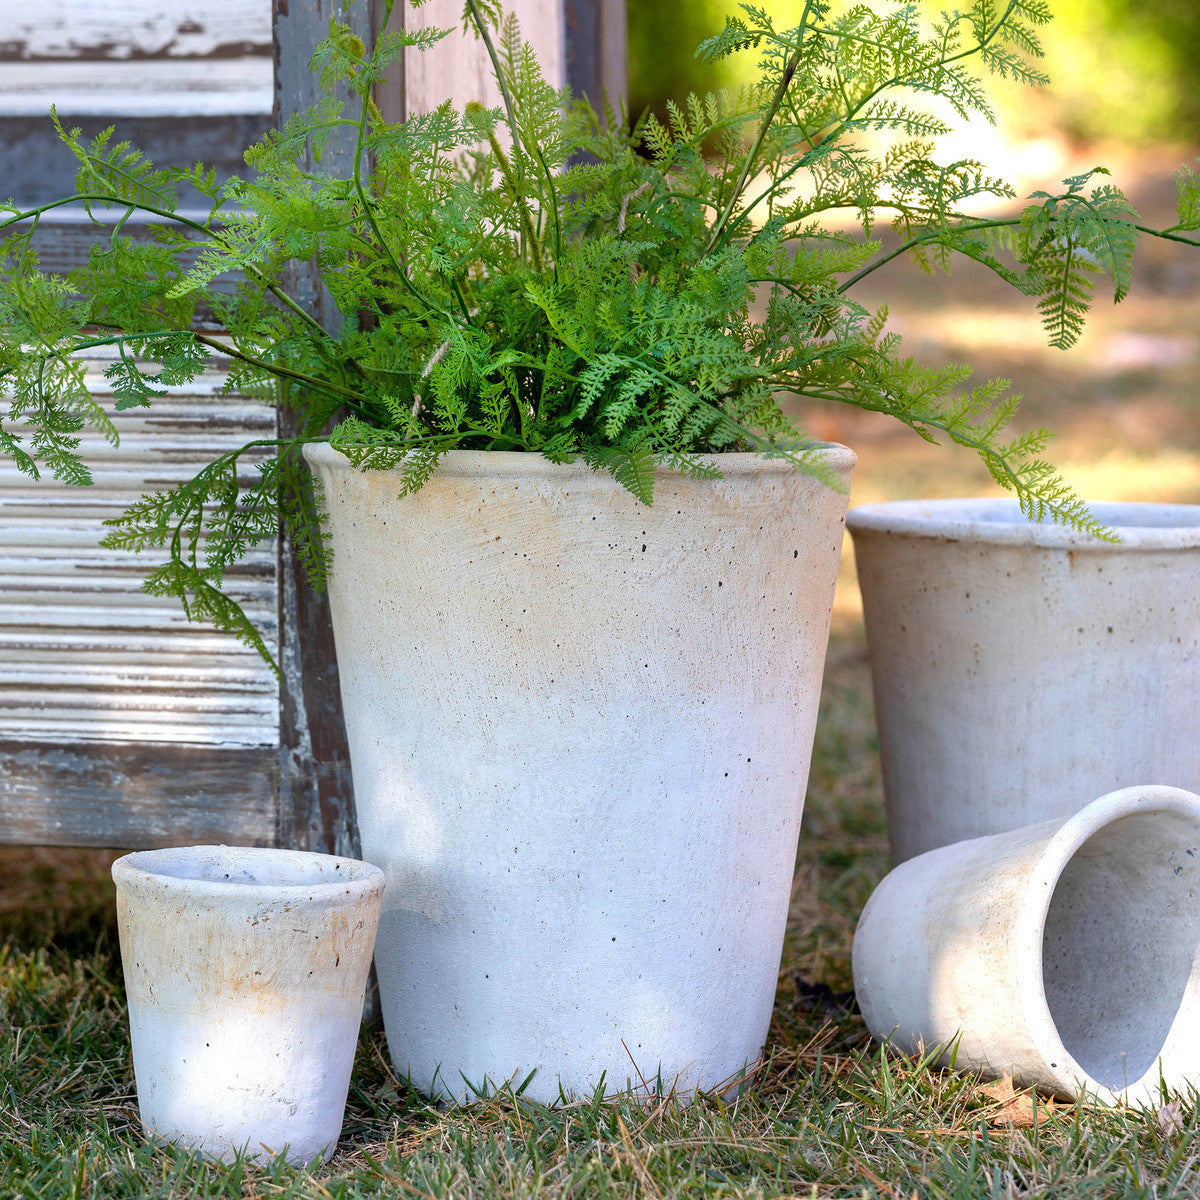 Distressed Concrete Tall Large Planter